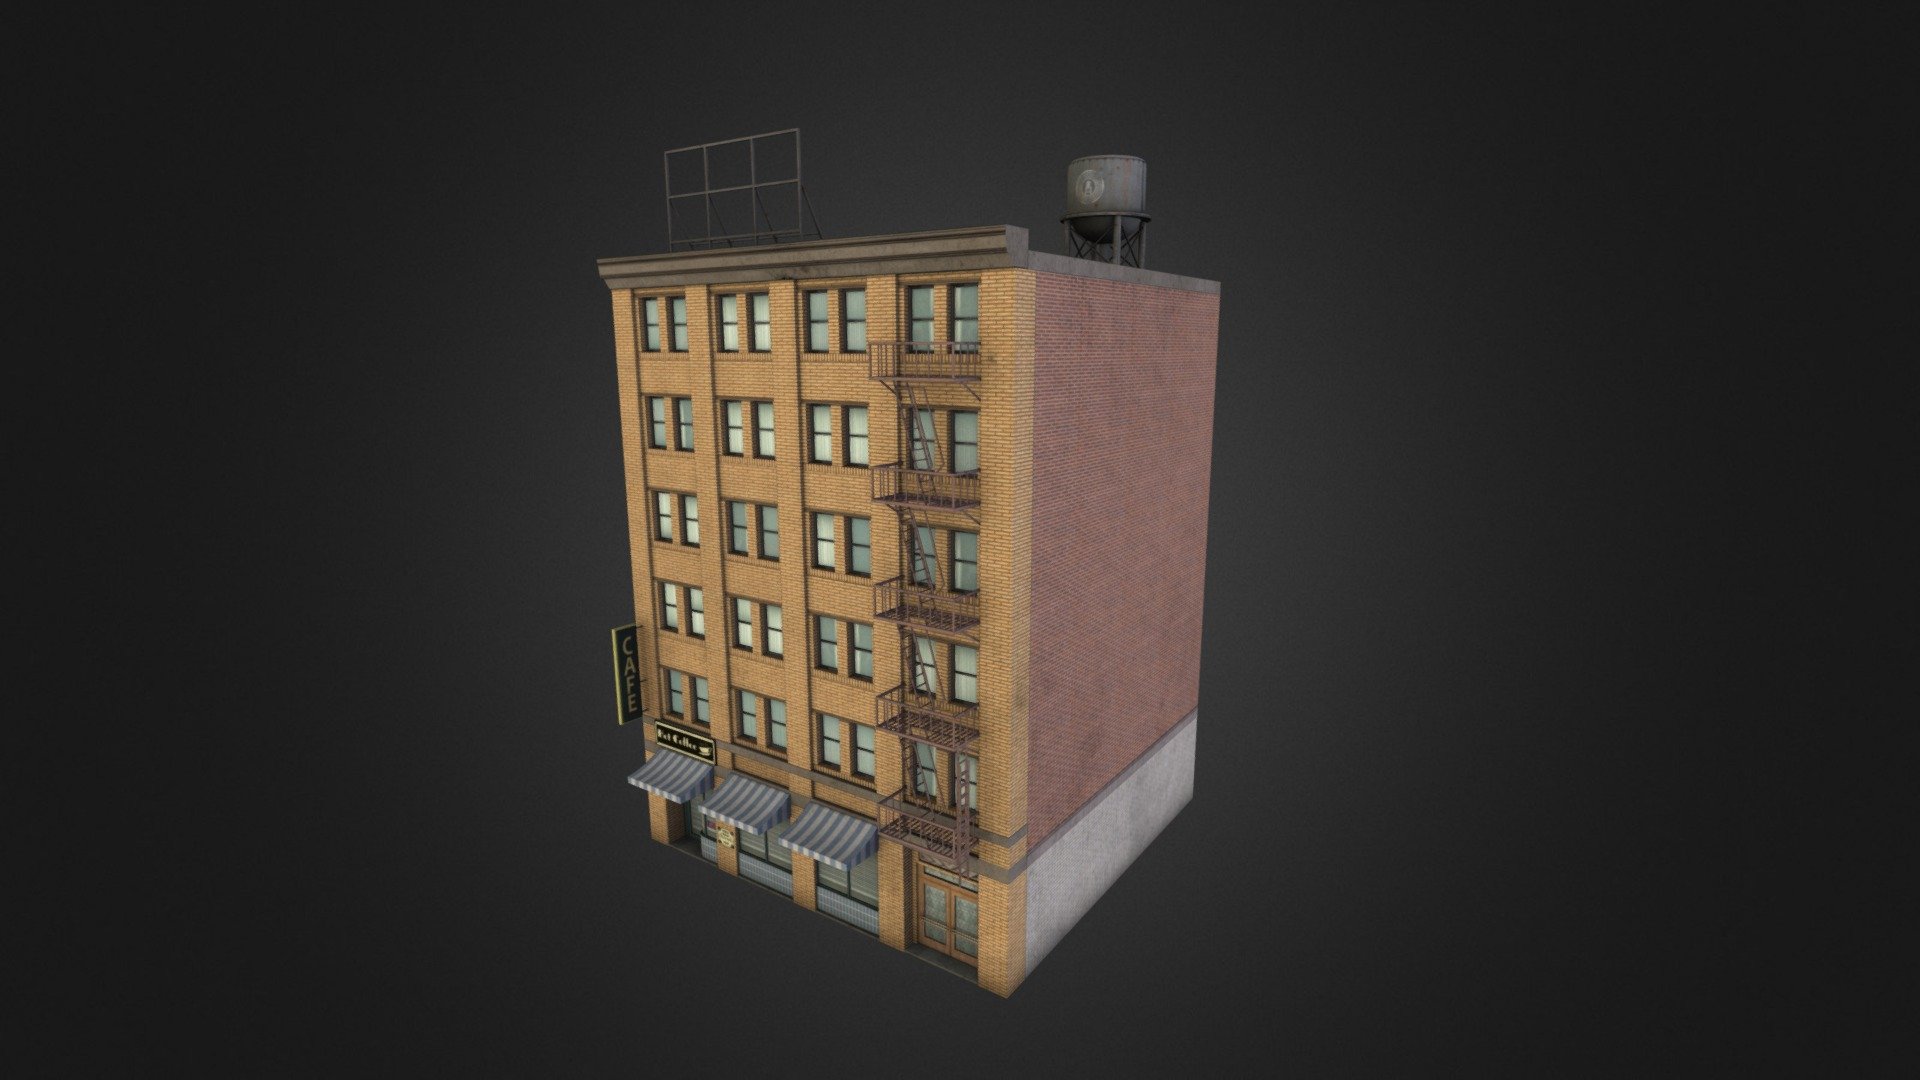 Made for Unity3d Asset Store as part of the Retro City Pack - Retro City Pack Building 03 - 3D model by noirfx 3d model